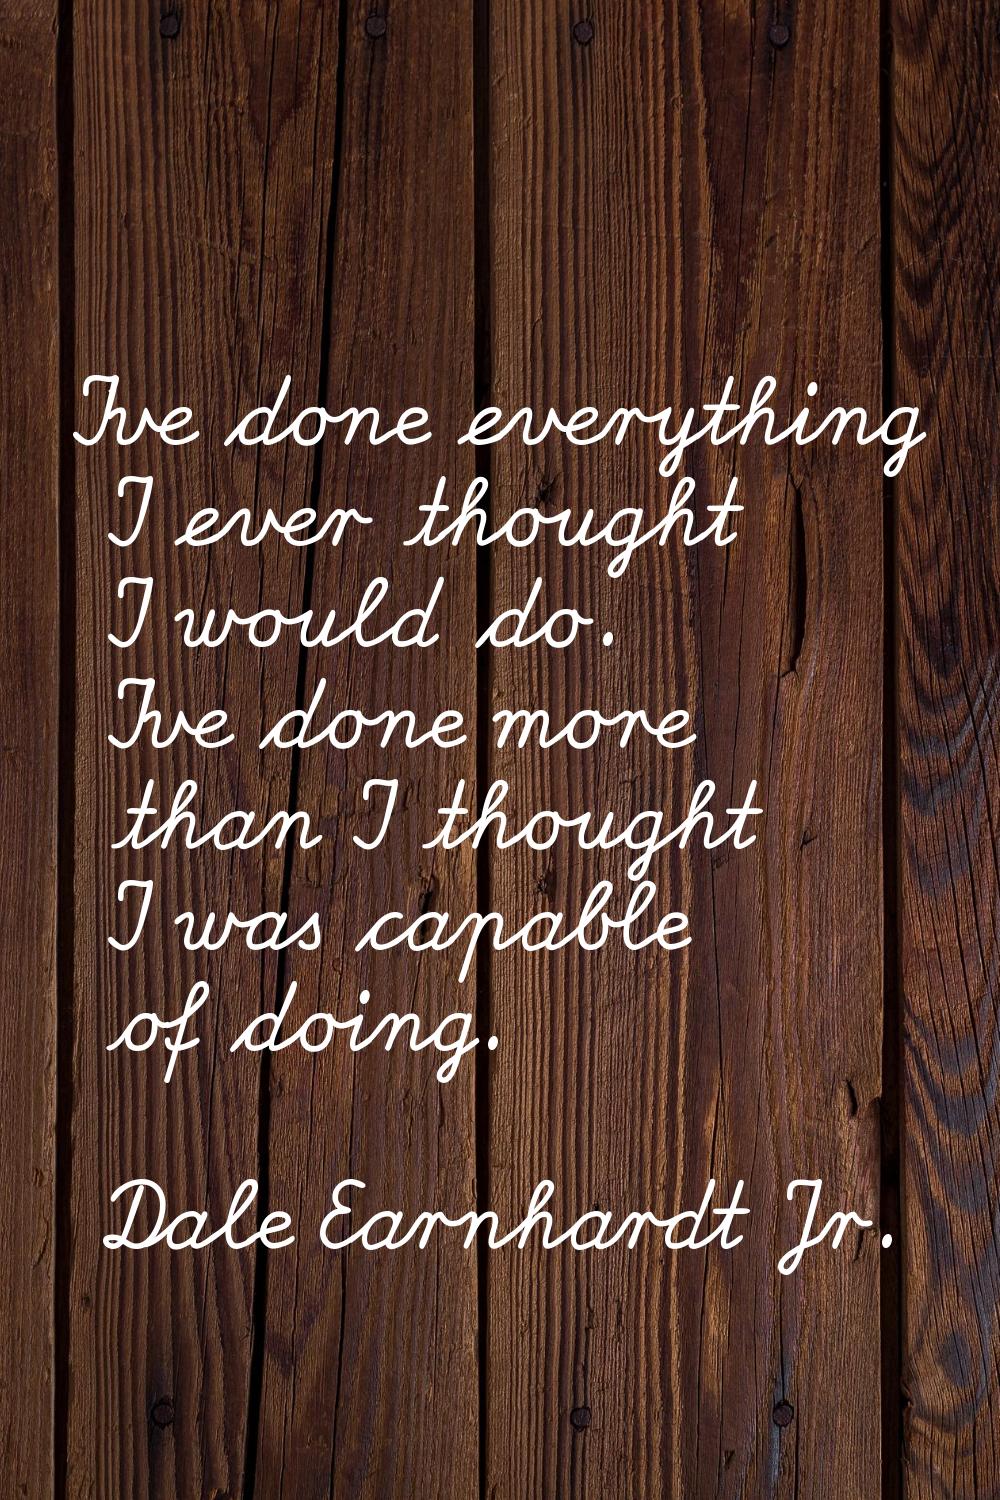 I've done everything I ever thought I would do. I've done more than I thought I was capable of doin